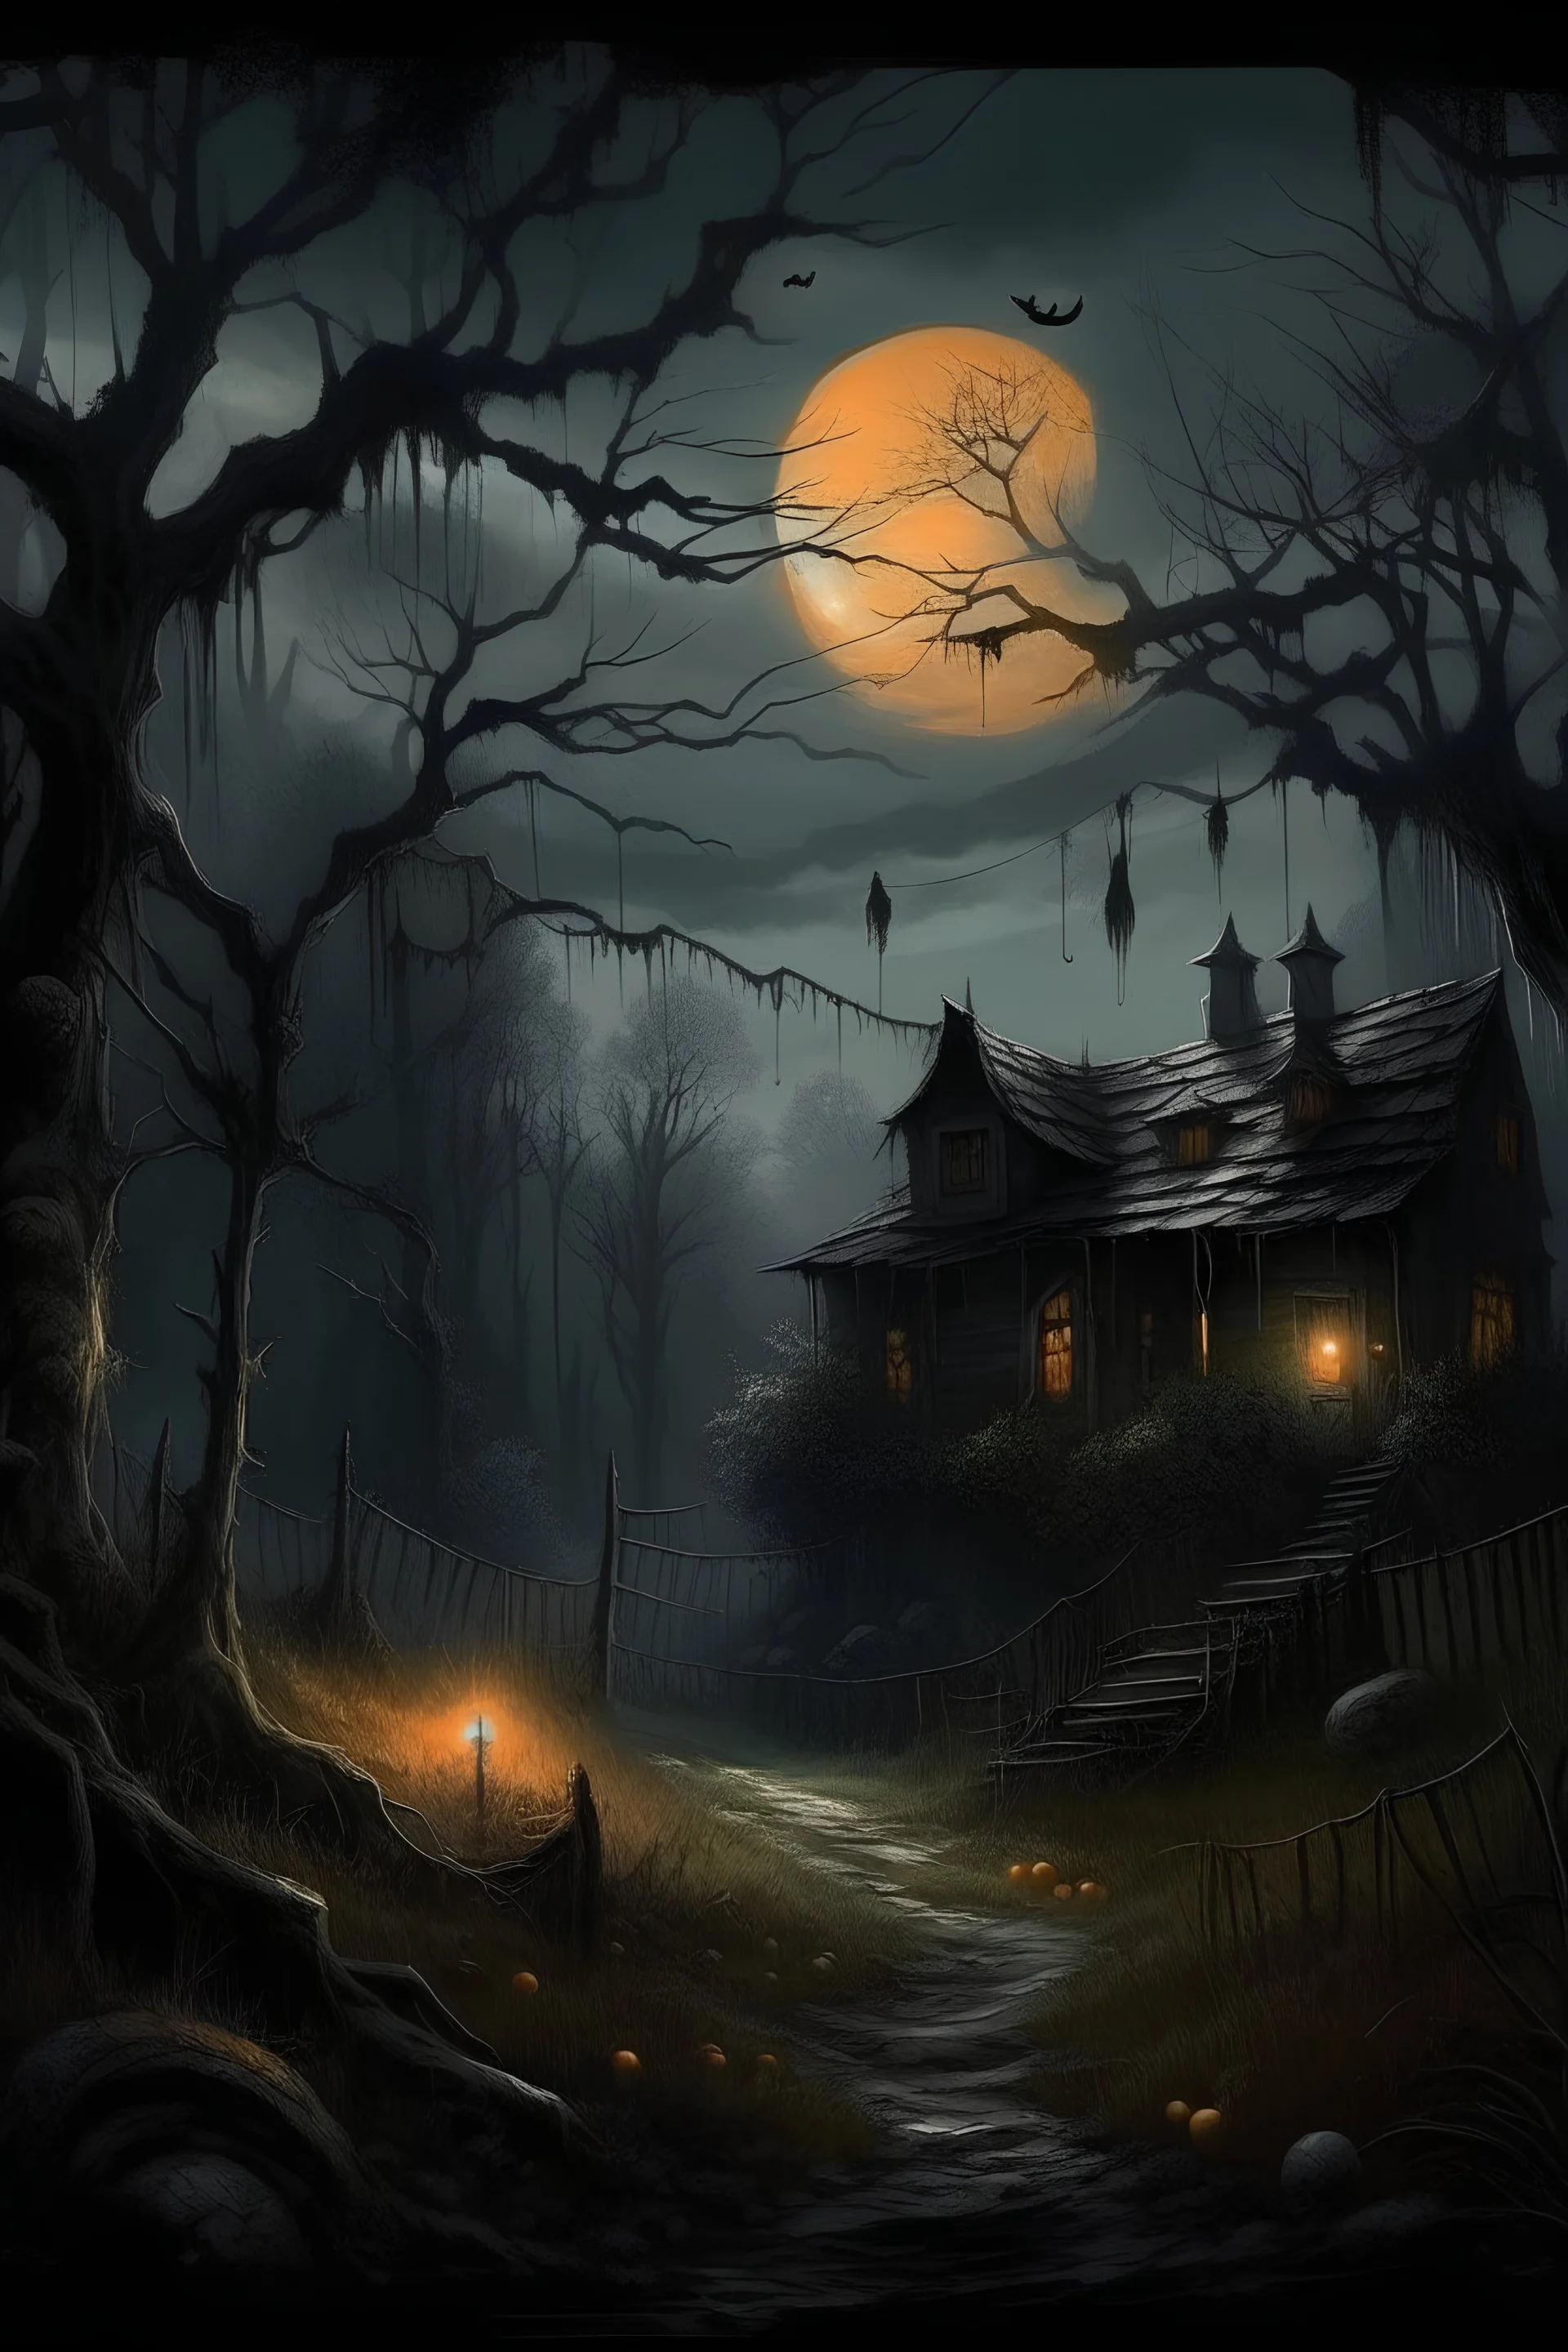 Halloween night landscape painting, darkened forest under a moonlit sky, ghosts and jack-o-lanterns glowing among the bare trees, an abandoned house on a distant hill, hints of mystery and the supernatural in the shadows --v 5.2